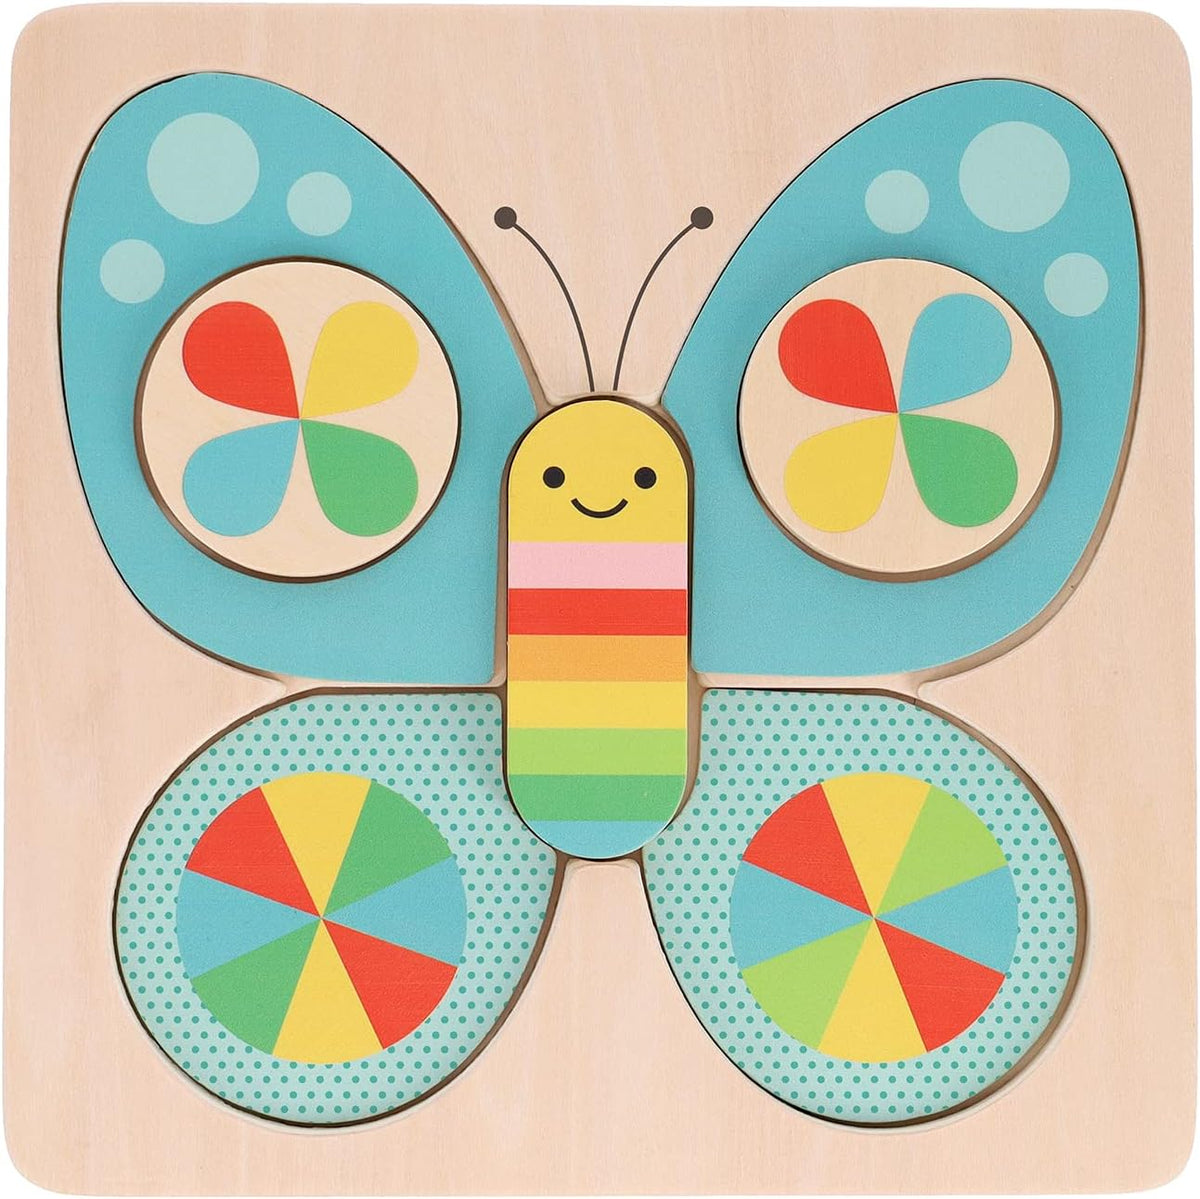 Little Butterfly Chunky Wood Puzzle